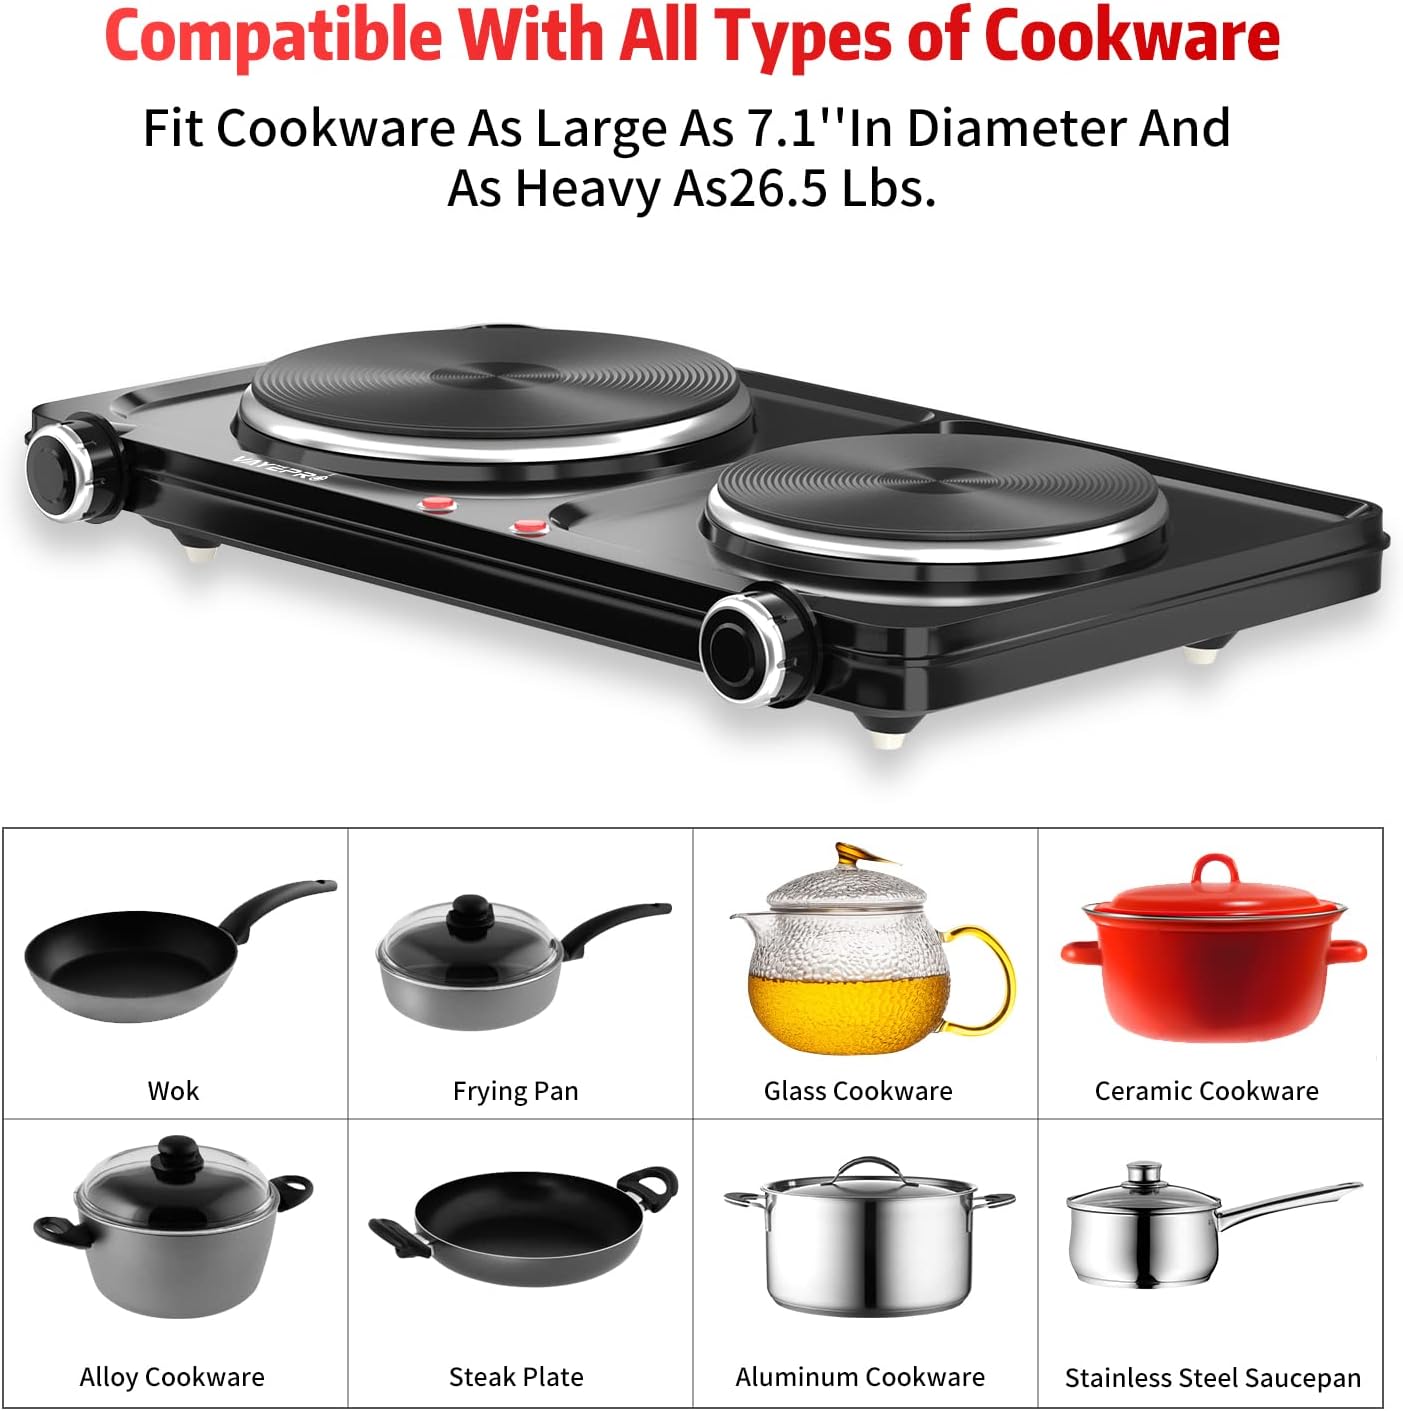 https://bigbigmart.com/wp-content/uploads/2023/07/Hot-Plate-for-Cooking-Vayepro-1800W-Portable-Electric-StoveDouble-Electric-Burner-for-CookingUL-listedCooktop-for-Dorm-Office-Home-Camp-Compatible-with-All-Cookware1.jpg